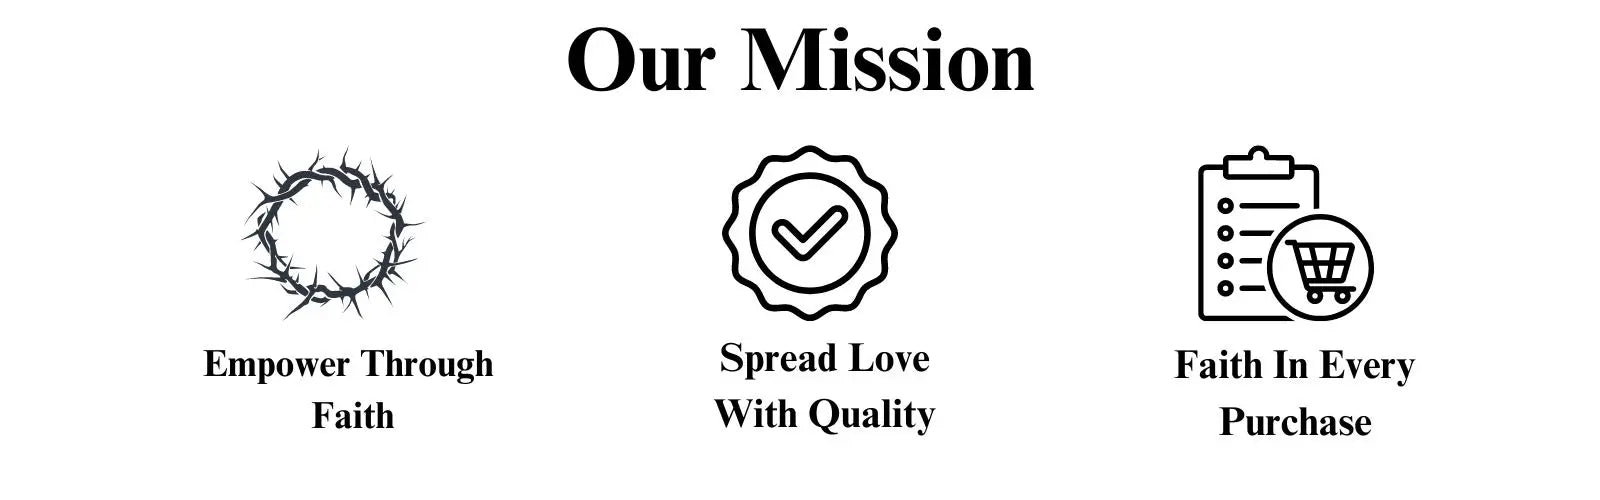 Our Mission | Christian Apparel